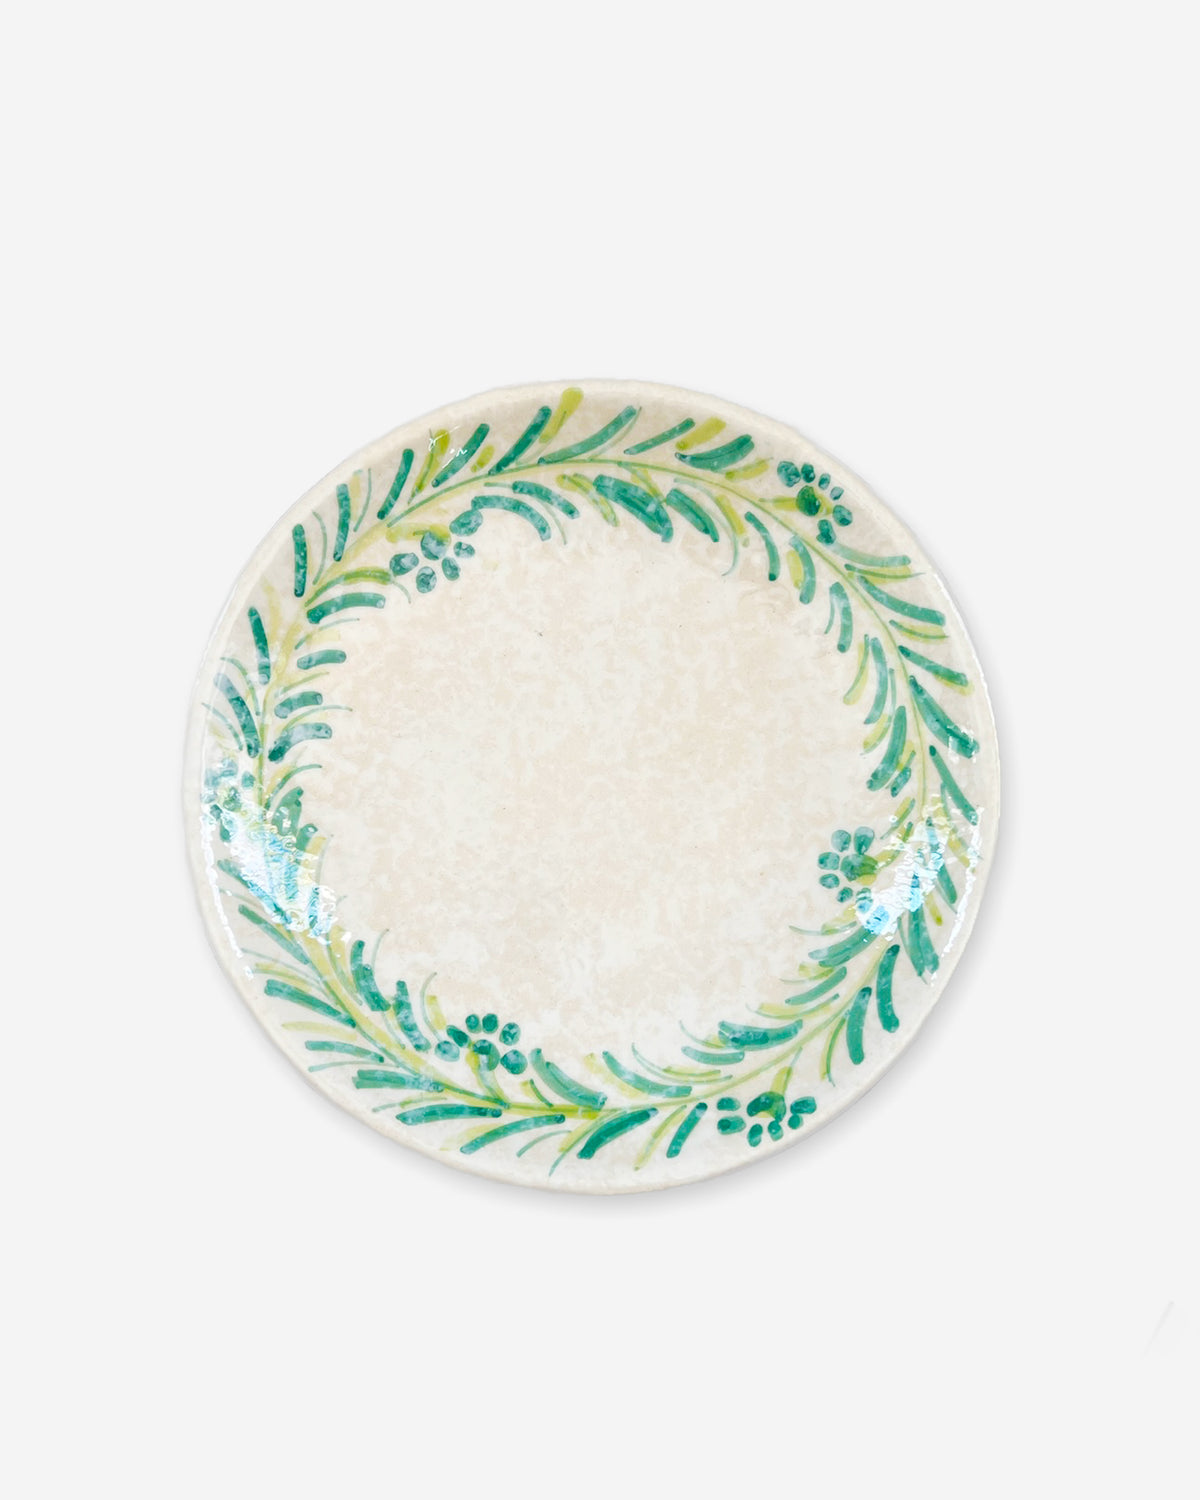 Floral Christian Plate